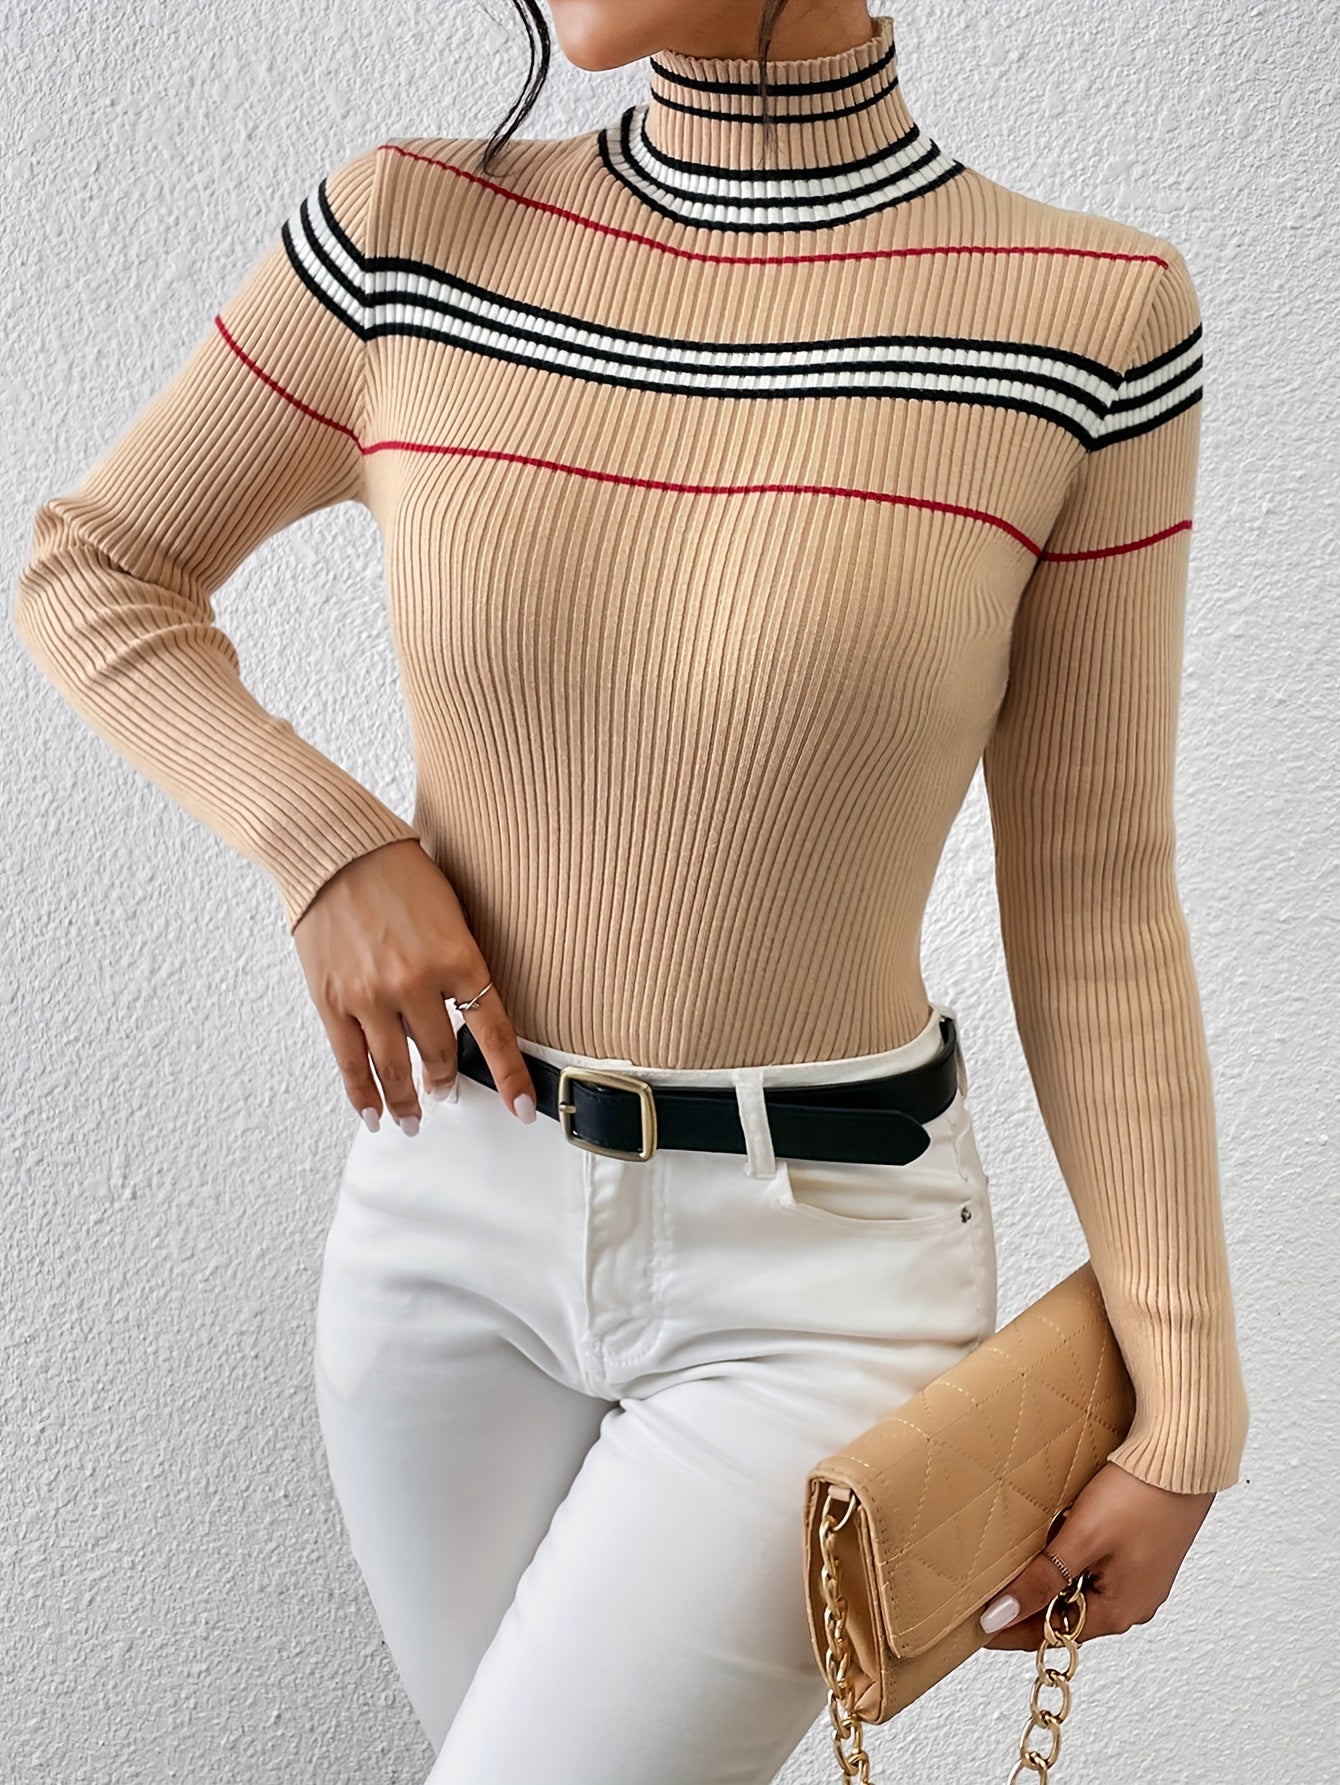 vlovelaw Striped Turtle Neck Pullover Sweater, Casual Long Sleeve Slim Sweater For Fall & Winter, Women's Clothing